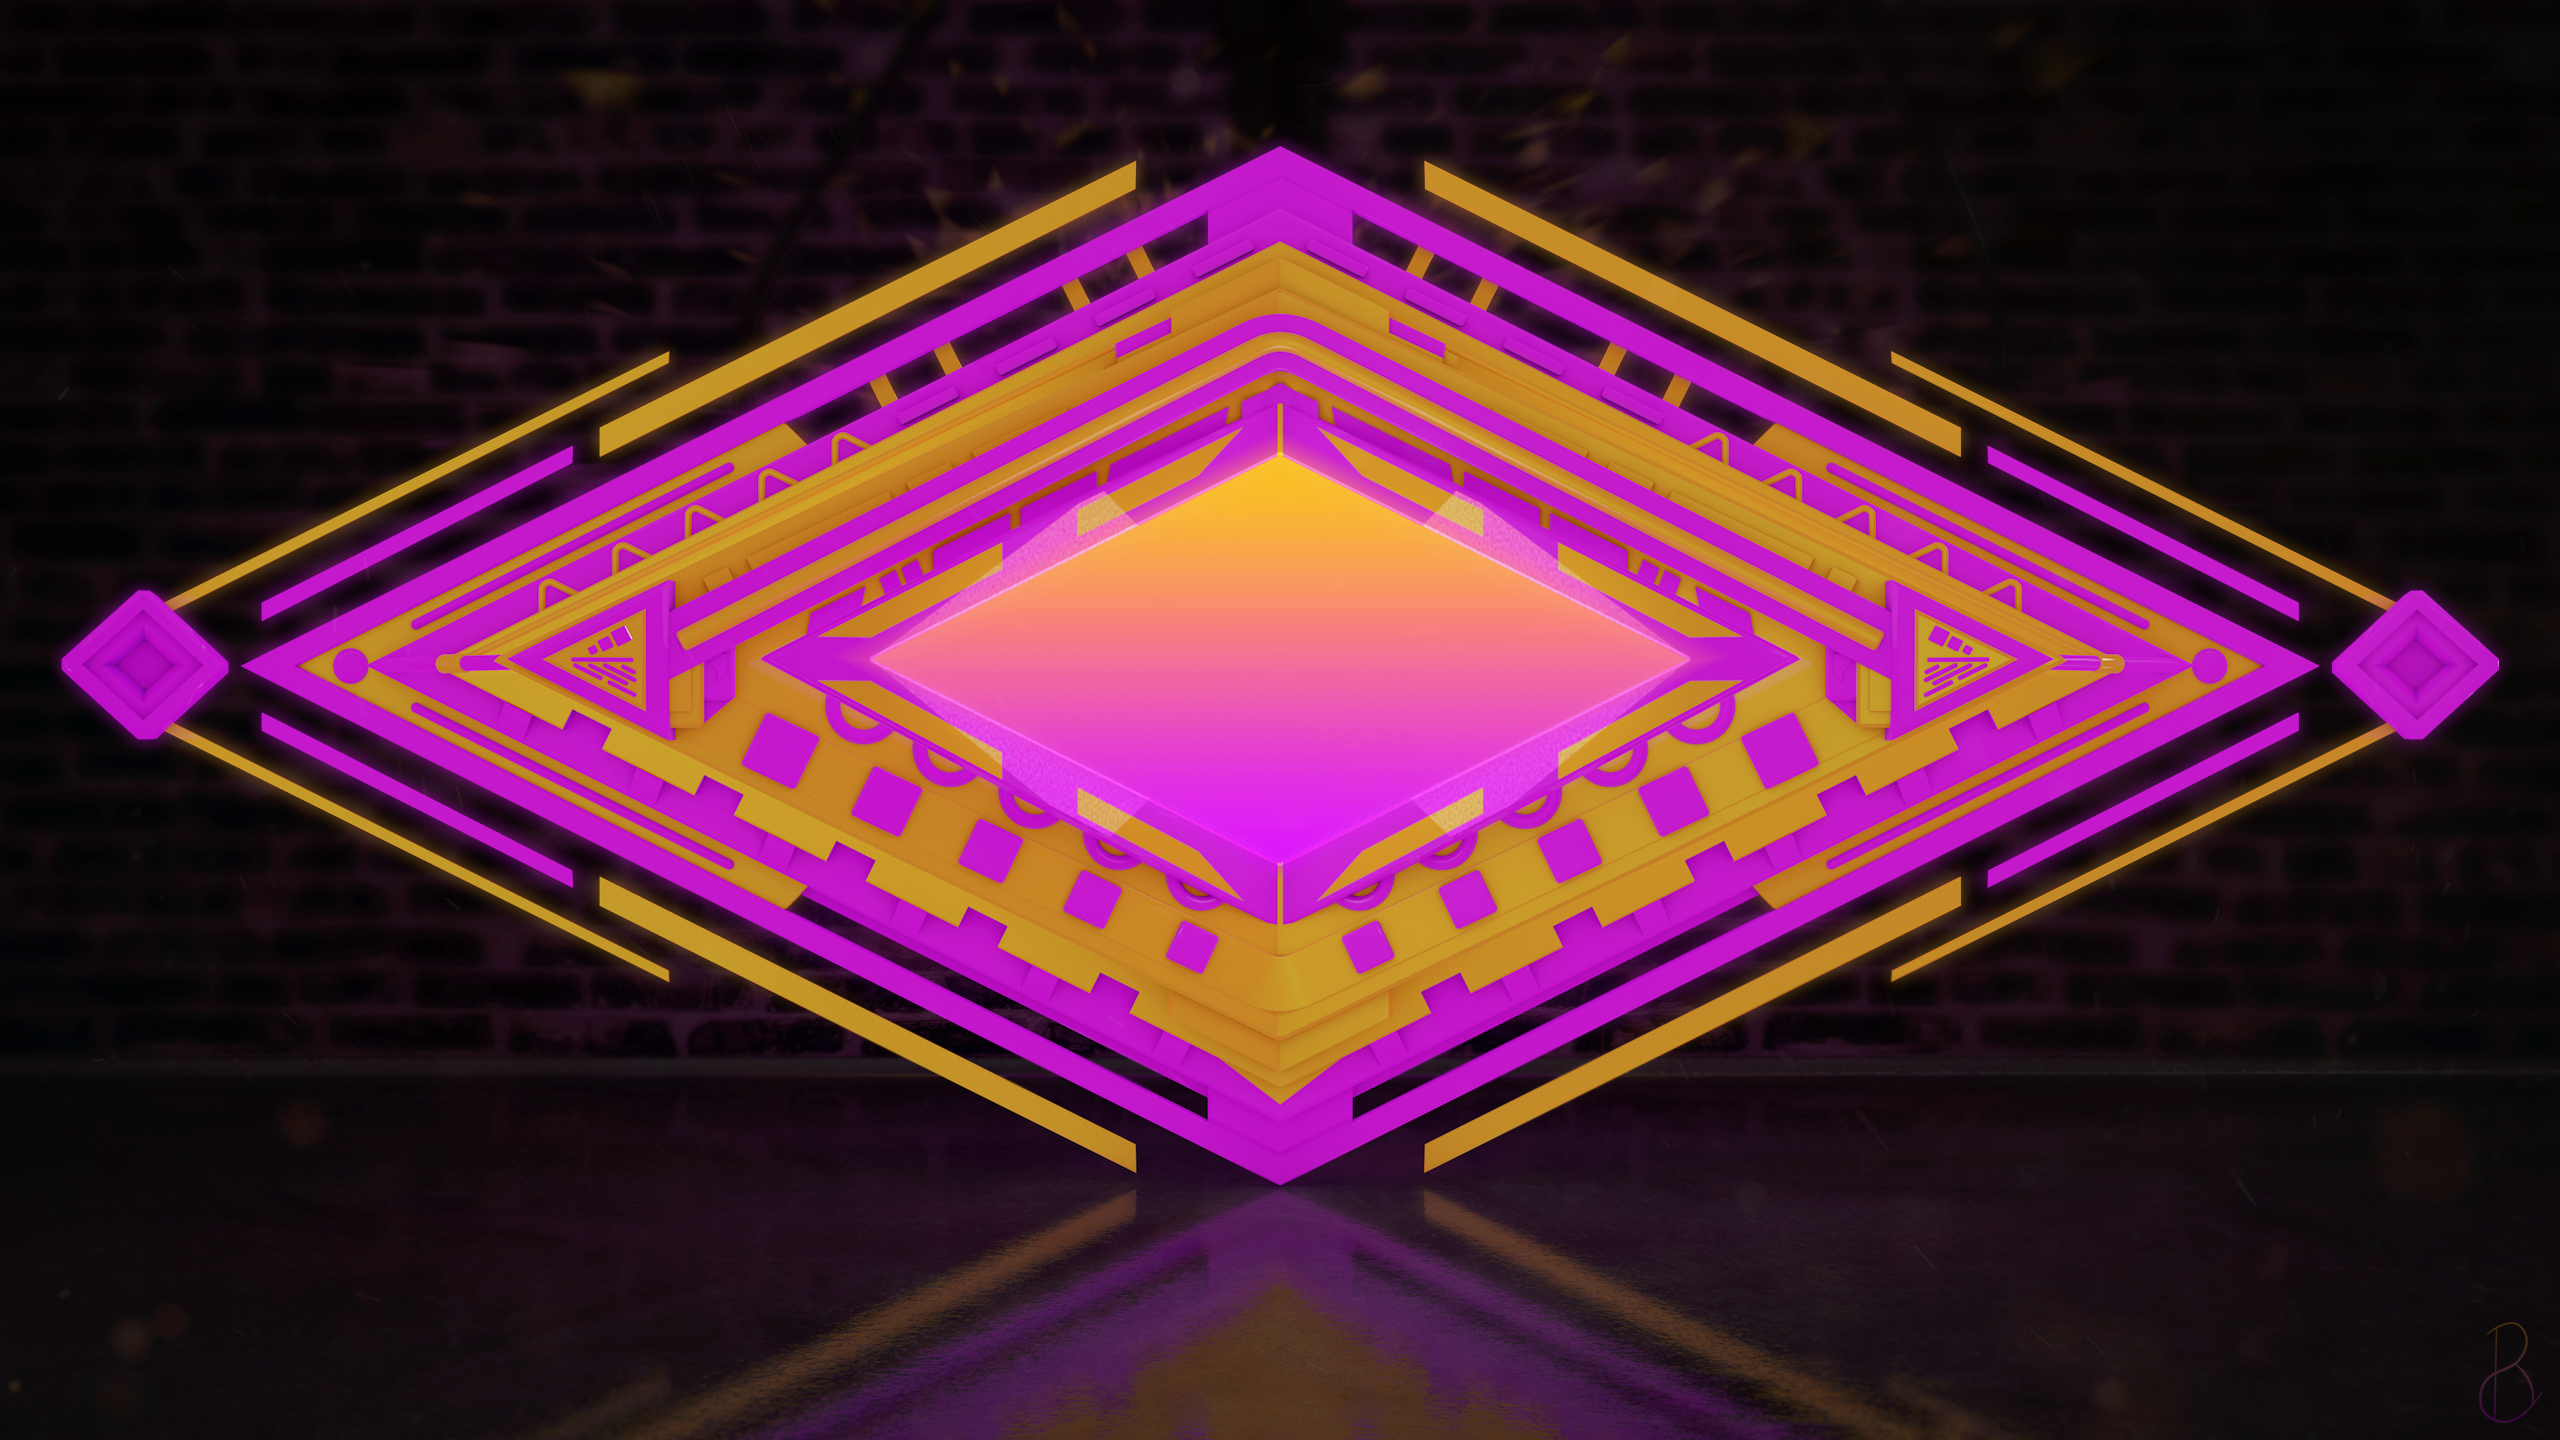 General 2560x1440 rhombus abstract crystal  geometric figures geometry 3D Abstract bright warm colors saturation glowing reflection pink